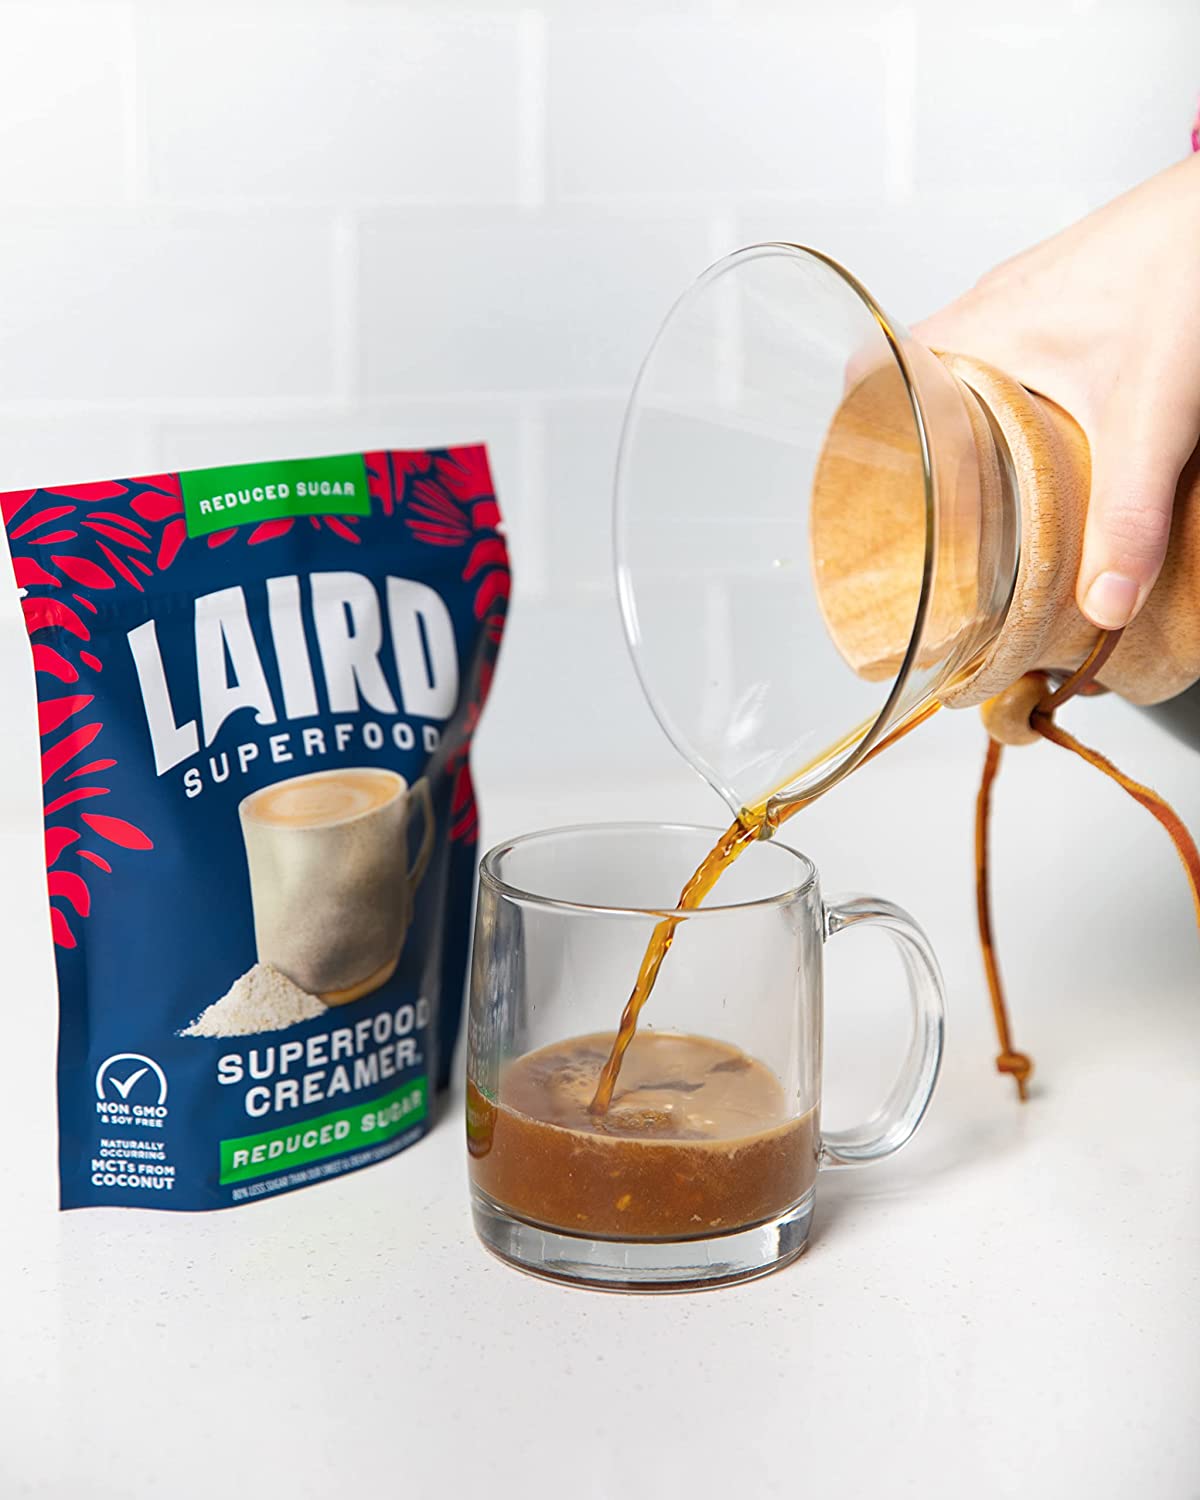 Laird Superfood Creamer® - Reduced Sugar with coffee